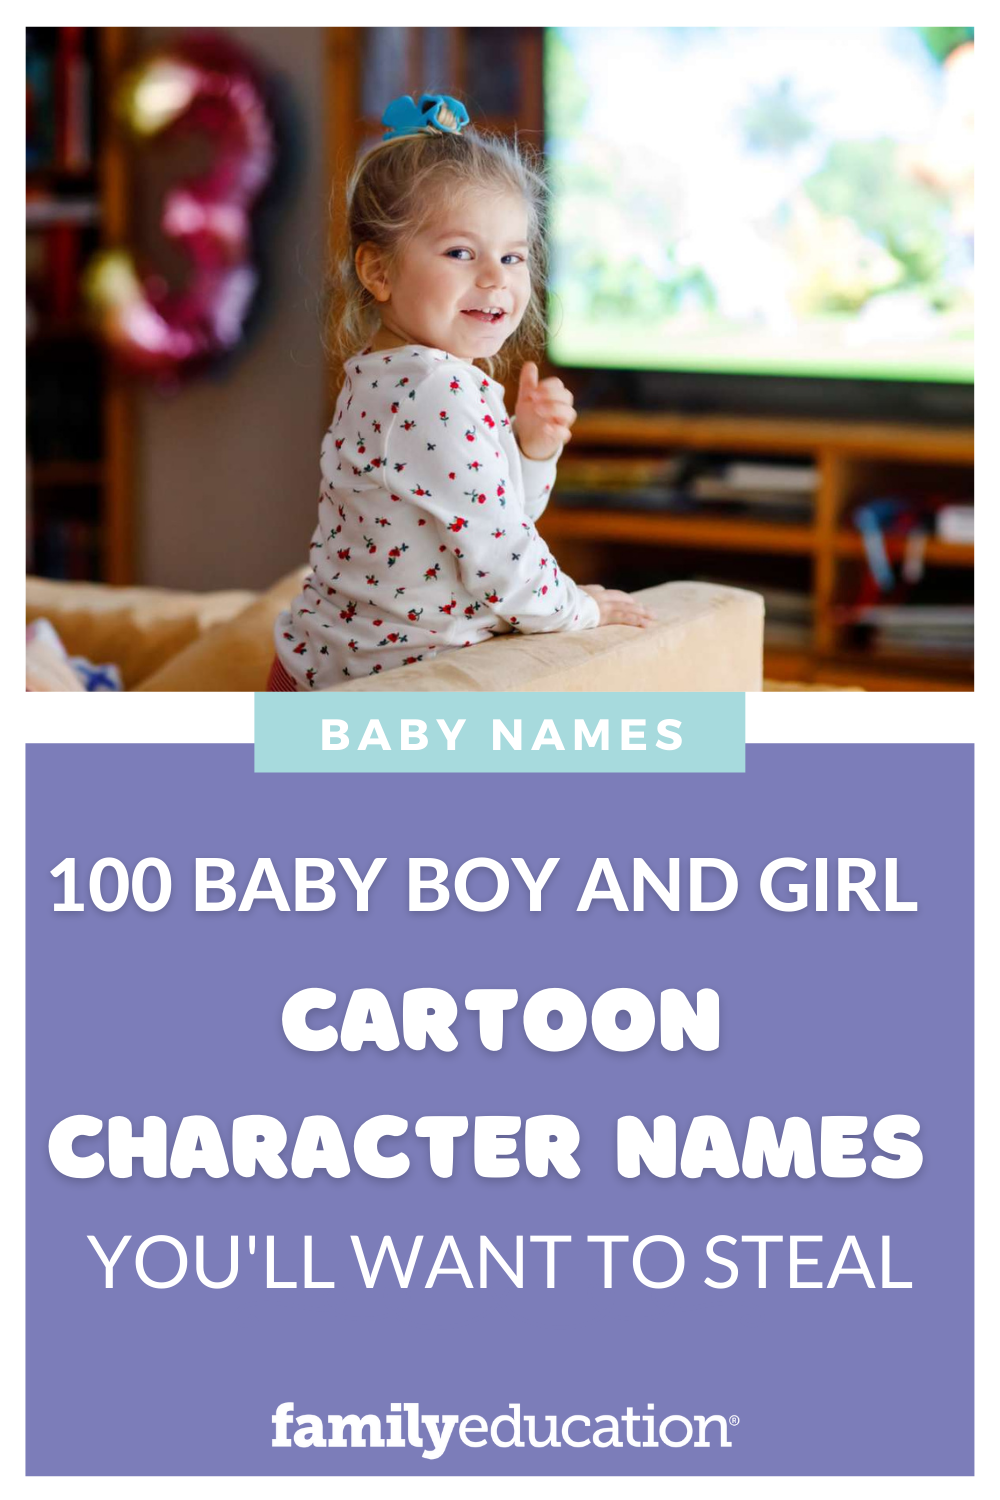 100 Baby Boy and Girl Cartoon Character Names You'll Want to Steal - Pinterest Image